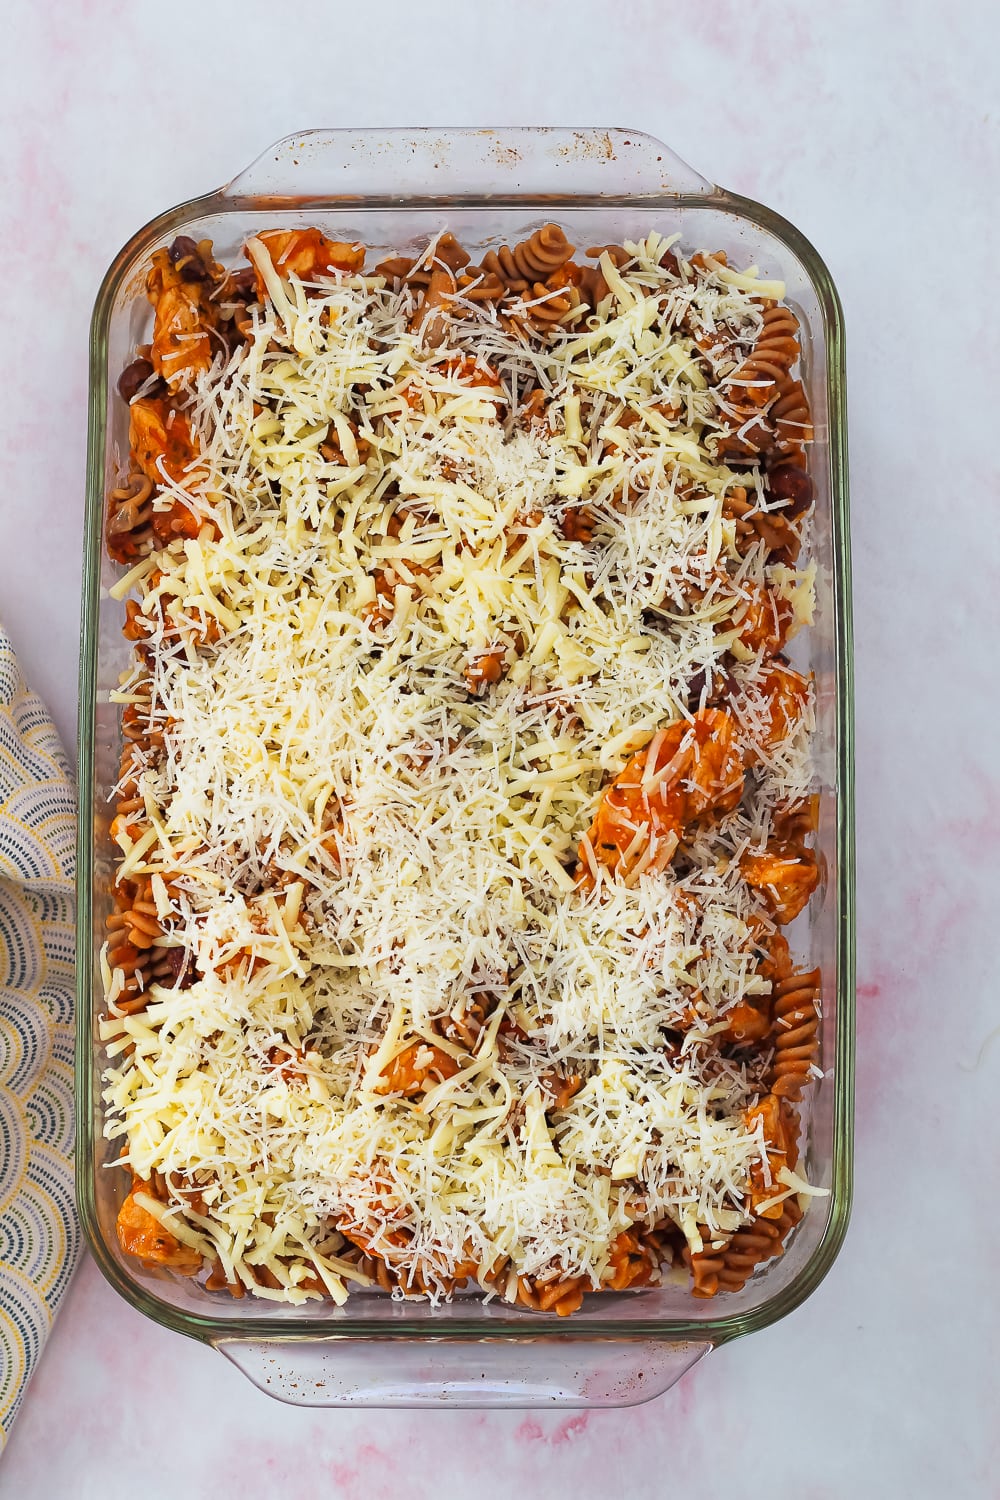 process shot showing the pasta bake in a large baking dish topped with cheese